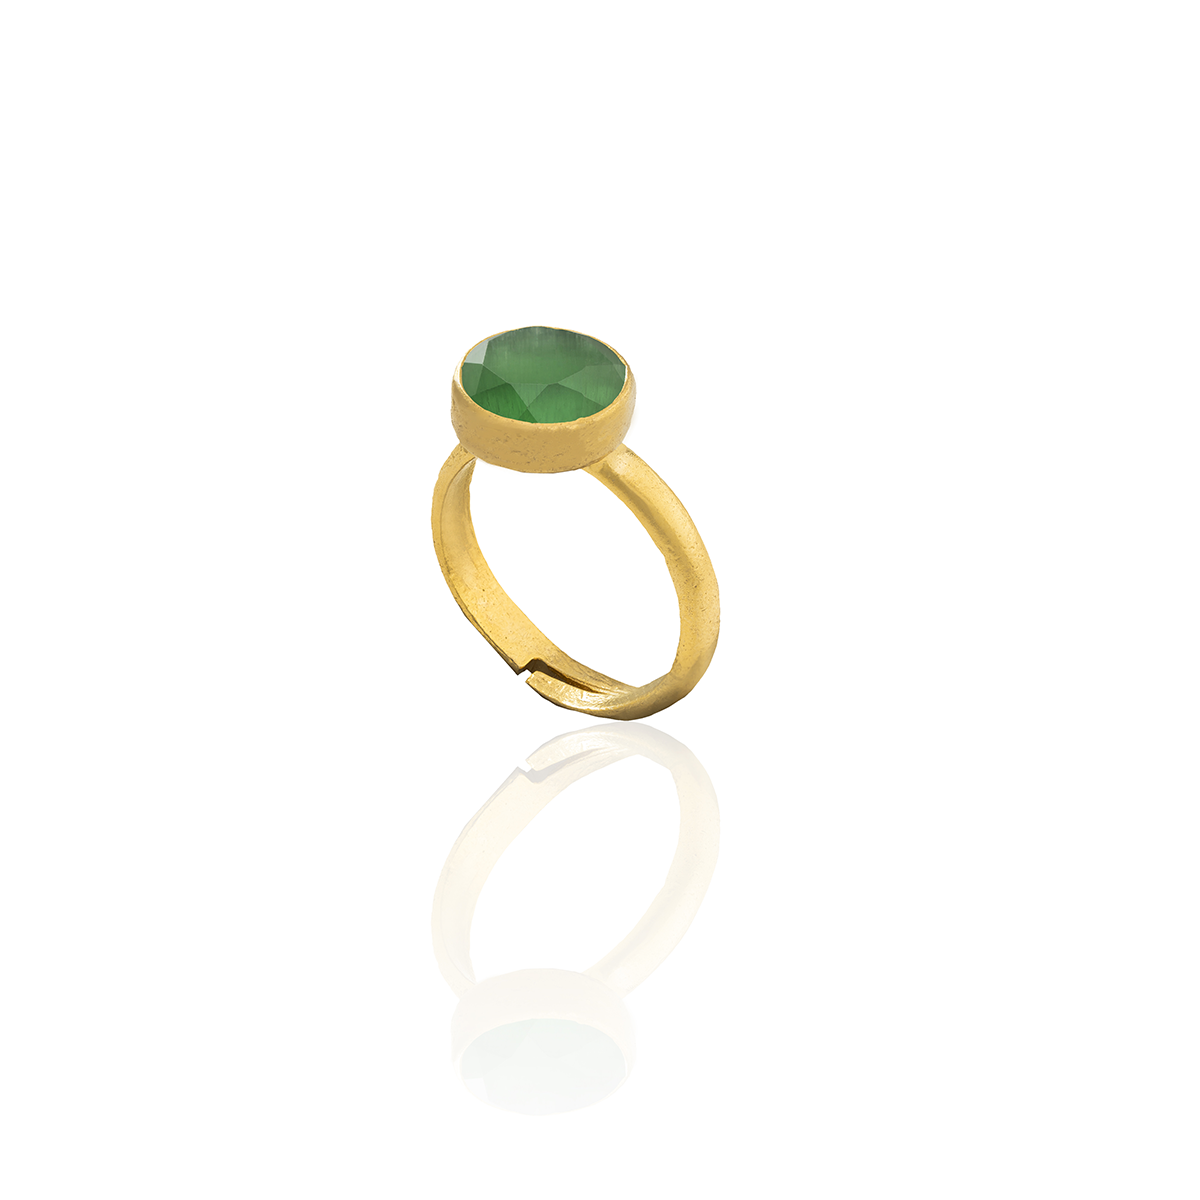 R08 Gold Plated Women's Ring - 100% Handcrafted Special Design